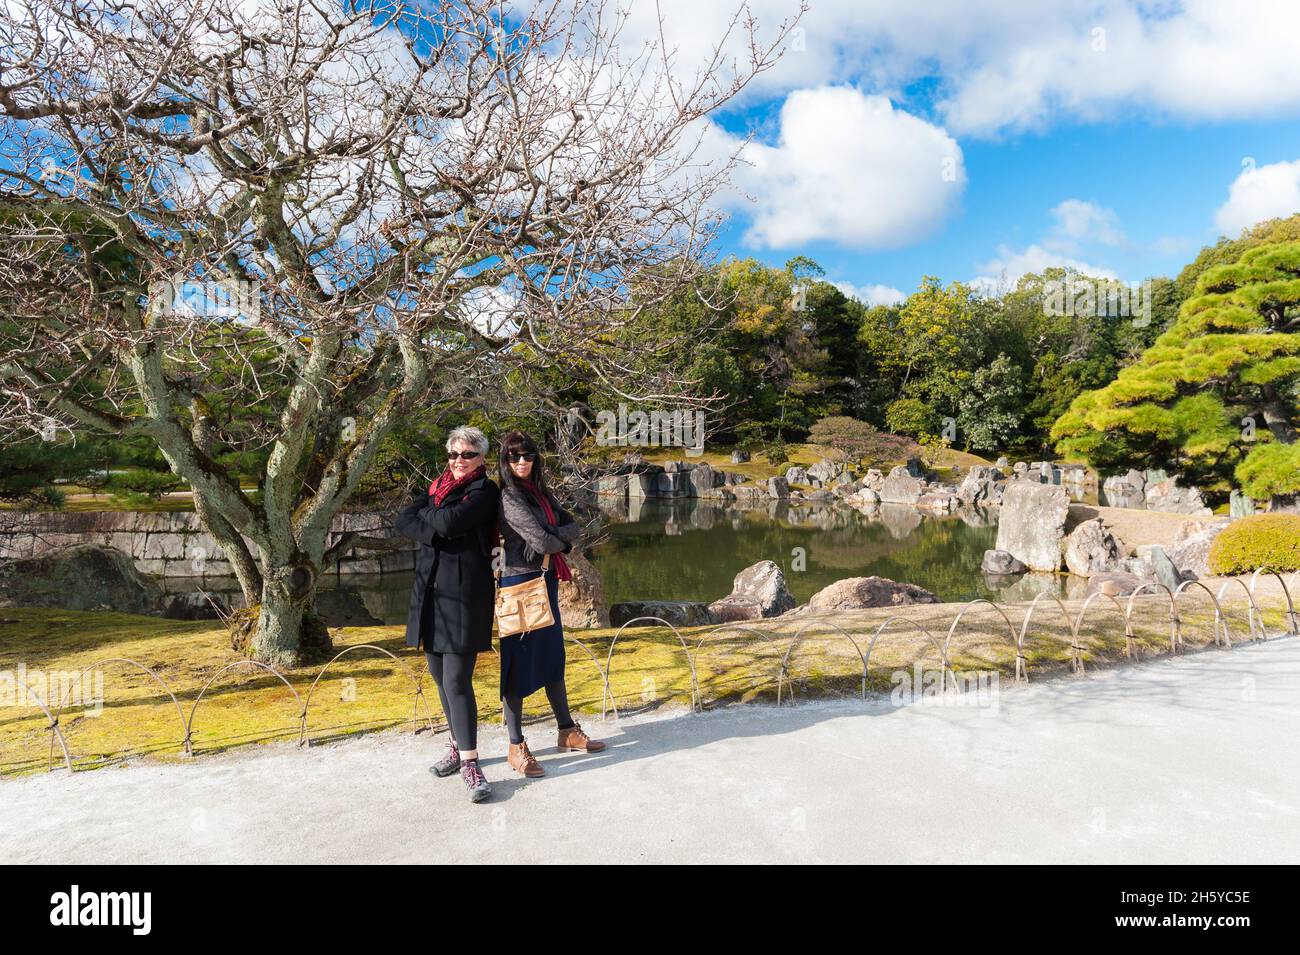 Two female tourists posing back to back on the path leading past one of the gorgeous architecturally designed gardens at the Nijo Castle, Kyoto, Japan. Stock Photo